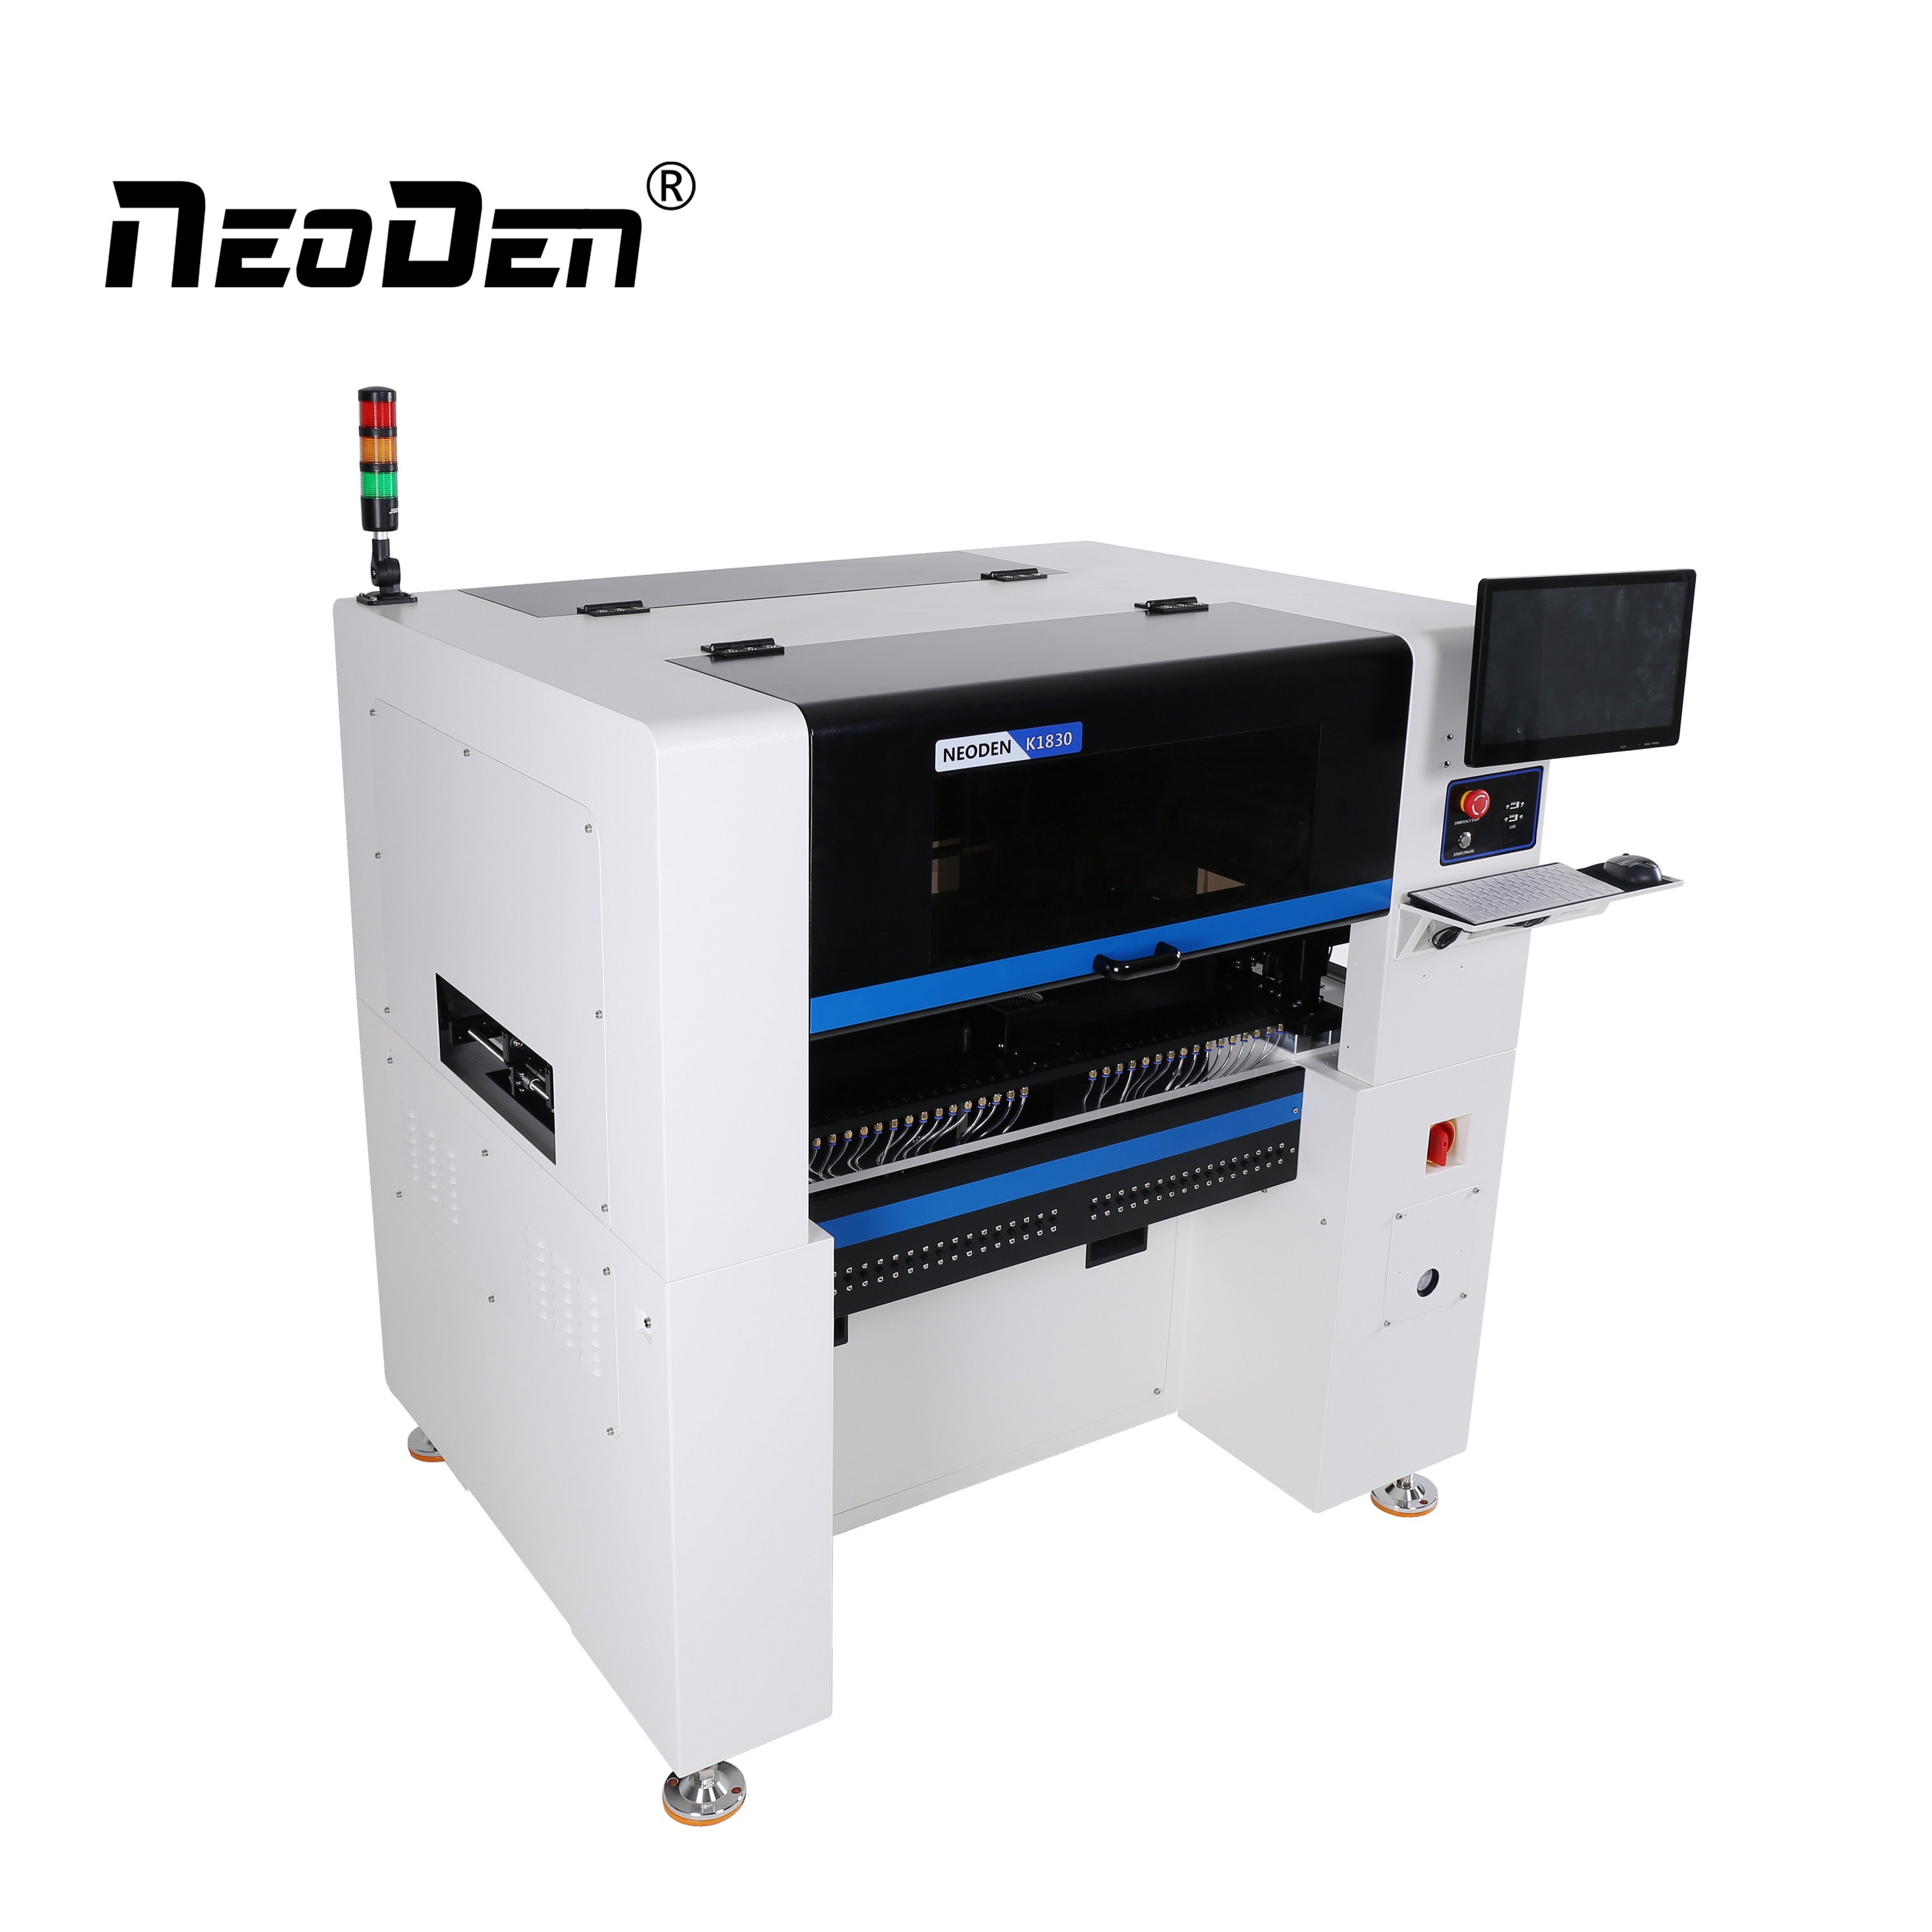 High Quality Smt Pick And Place Machine With 4 Heads - SMT pick and place NeoDen K1830 – Neoden